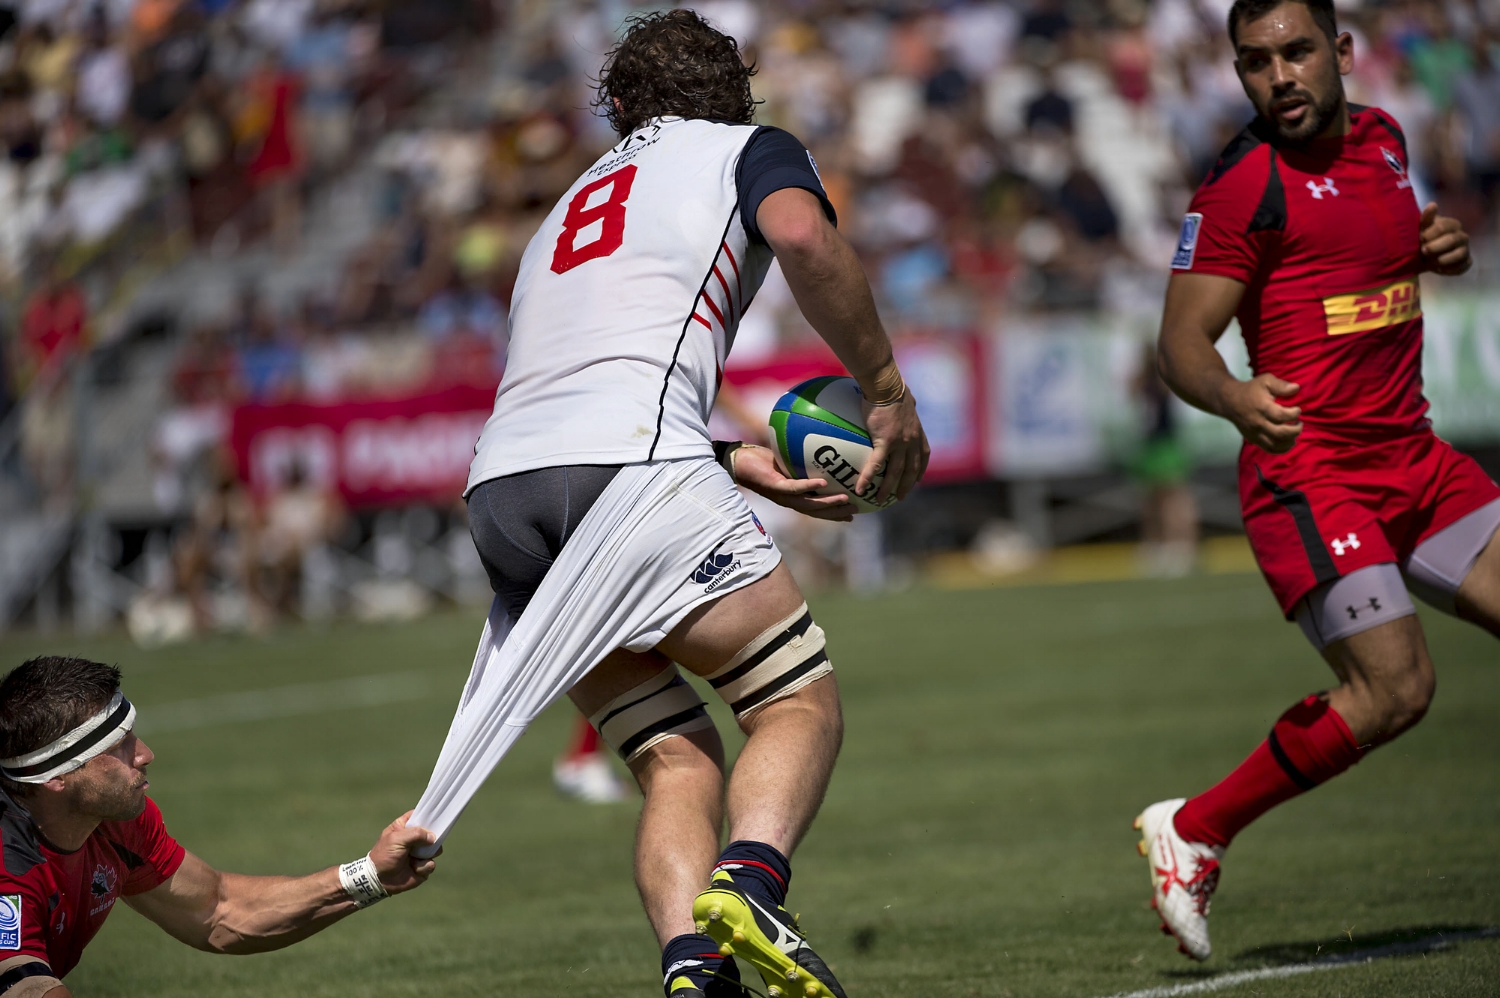  Men's Eagles Danny Barrett (8) is nearly tackled by Rugby Canada James Pritchard (15), left, during a rugby match between the USA Men's Eagles and Rugby Canada at Bonney Field in Sacramento on Saturday, June 21, 2014. 